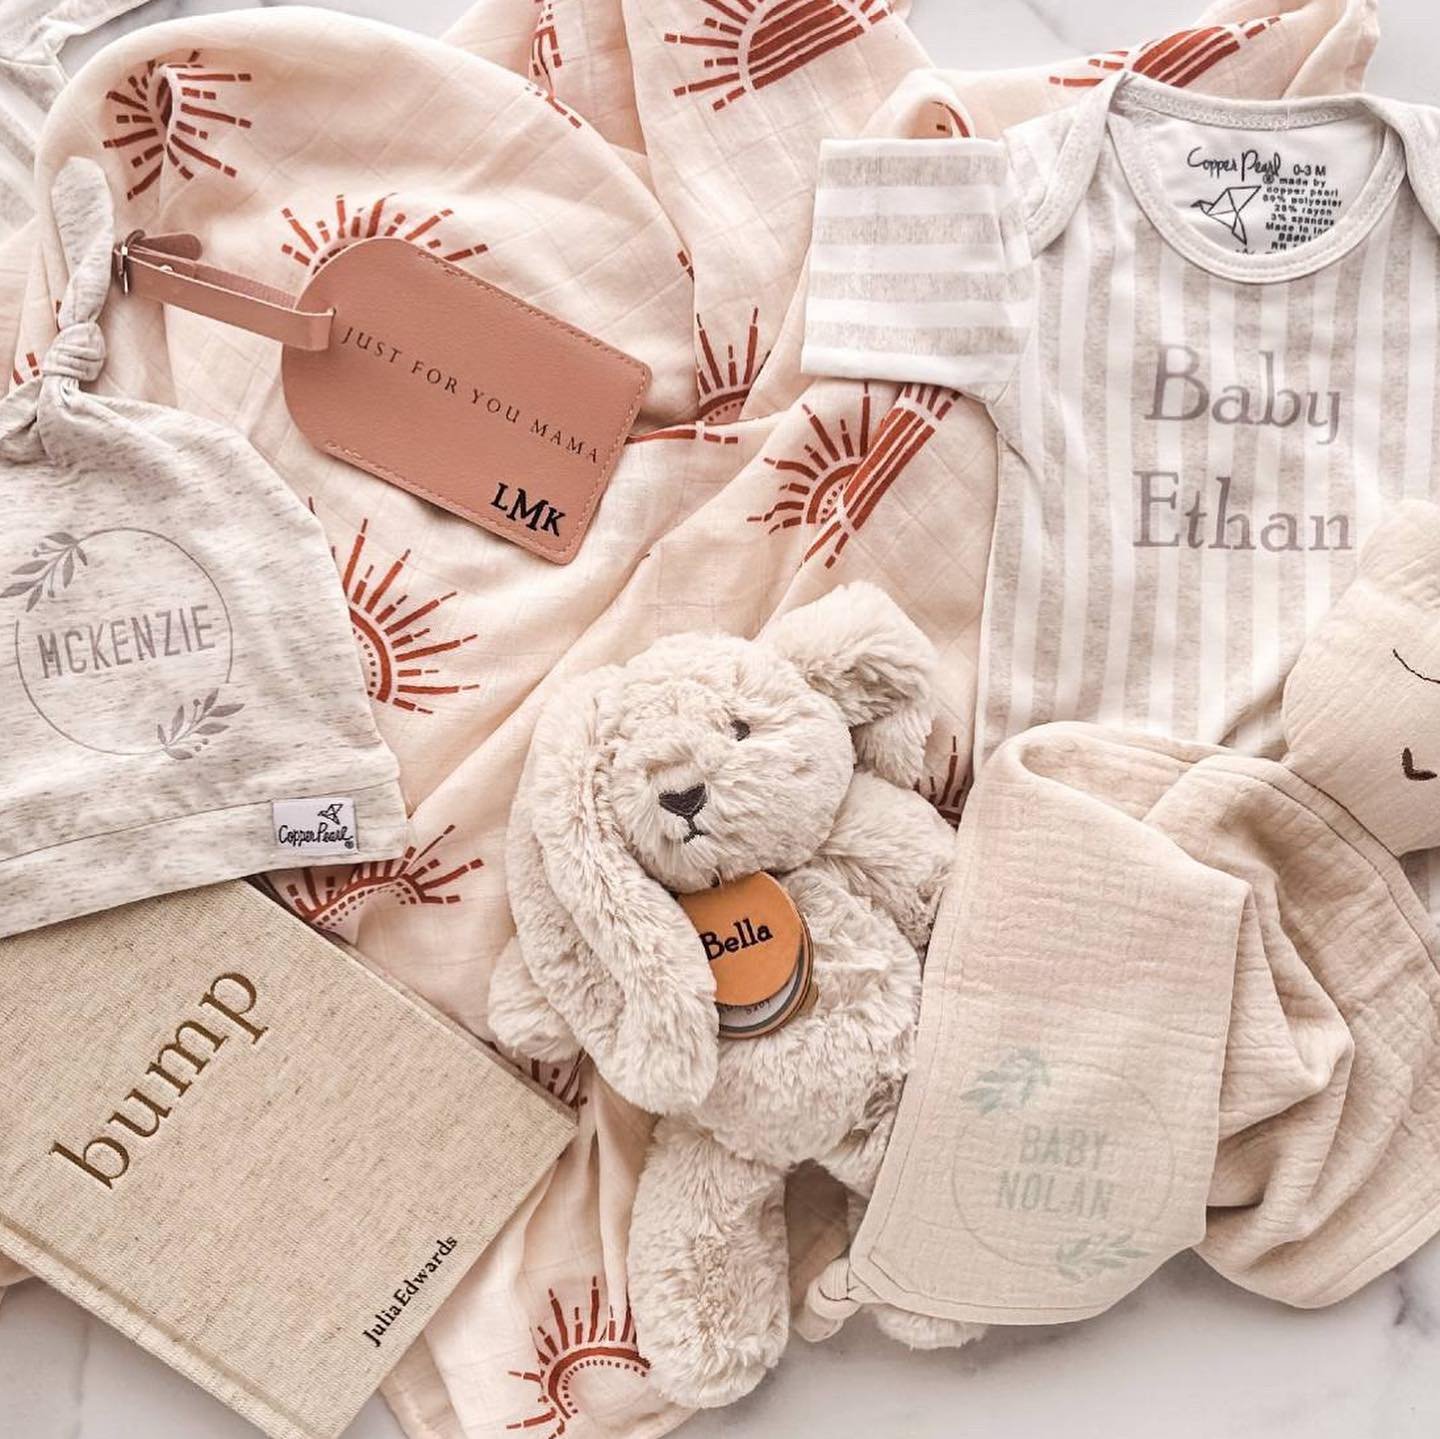 The Personalization Shop at Nurtured 9 is here! 
⠀⠀⠀⠀⠀⠀⠀⠀⠀
Add baby (or Mama&rsquo;s) name, initials or monogram to our collection of thoughtful gift items for a special, personalized touch. From onesie bodysuits, hats, swaddle blankets, loveys, and 